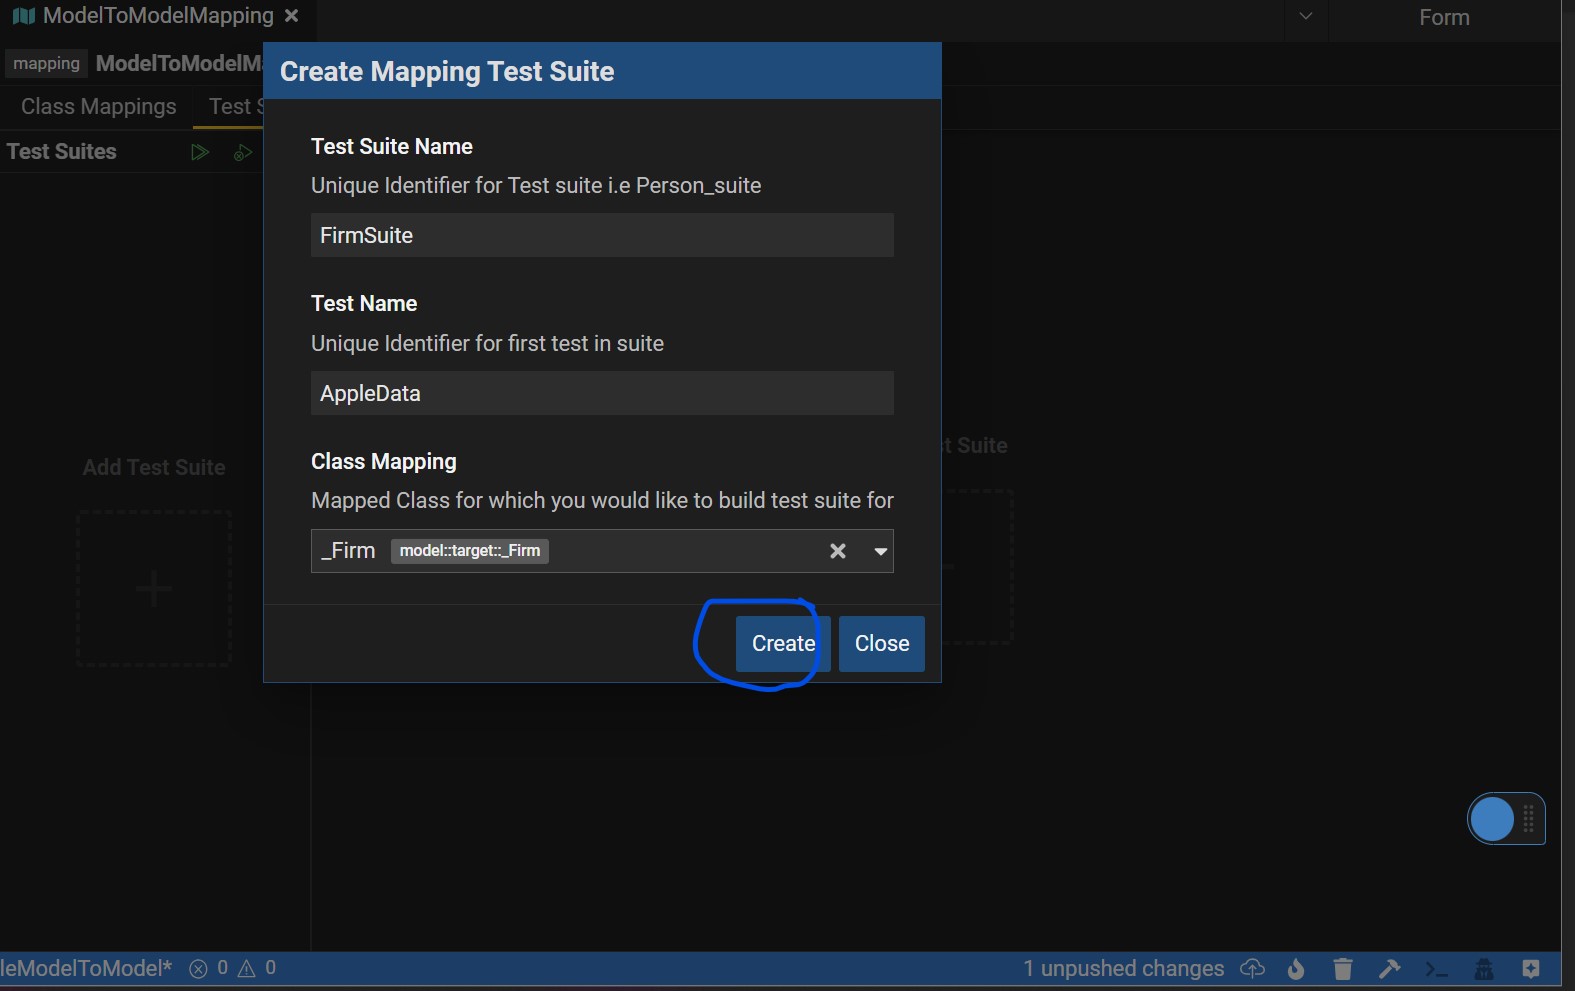 Mapping Test - Suite Modal